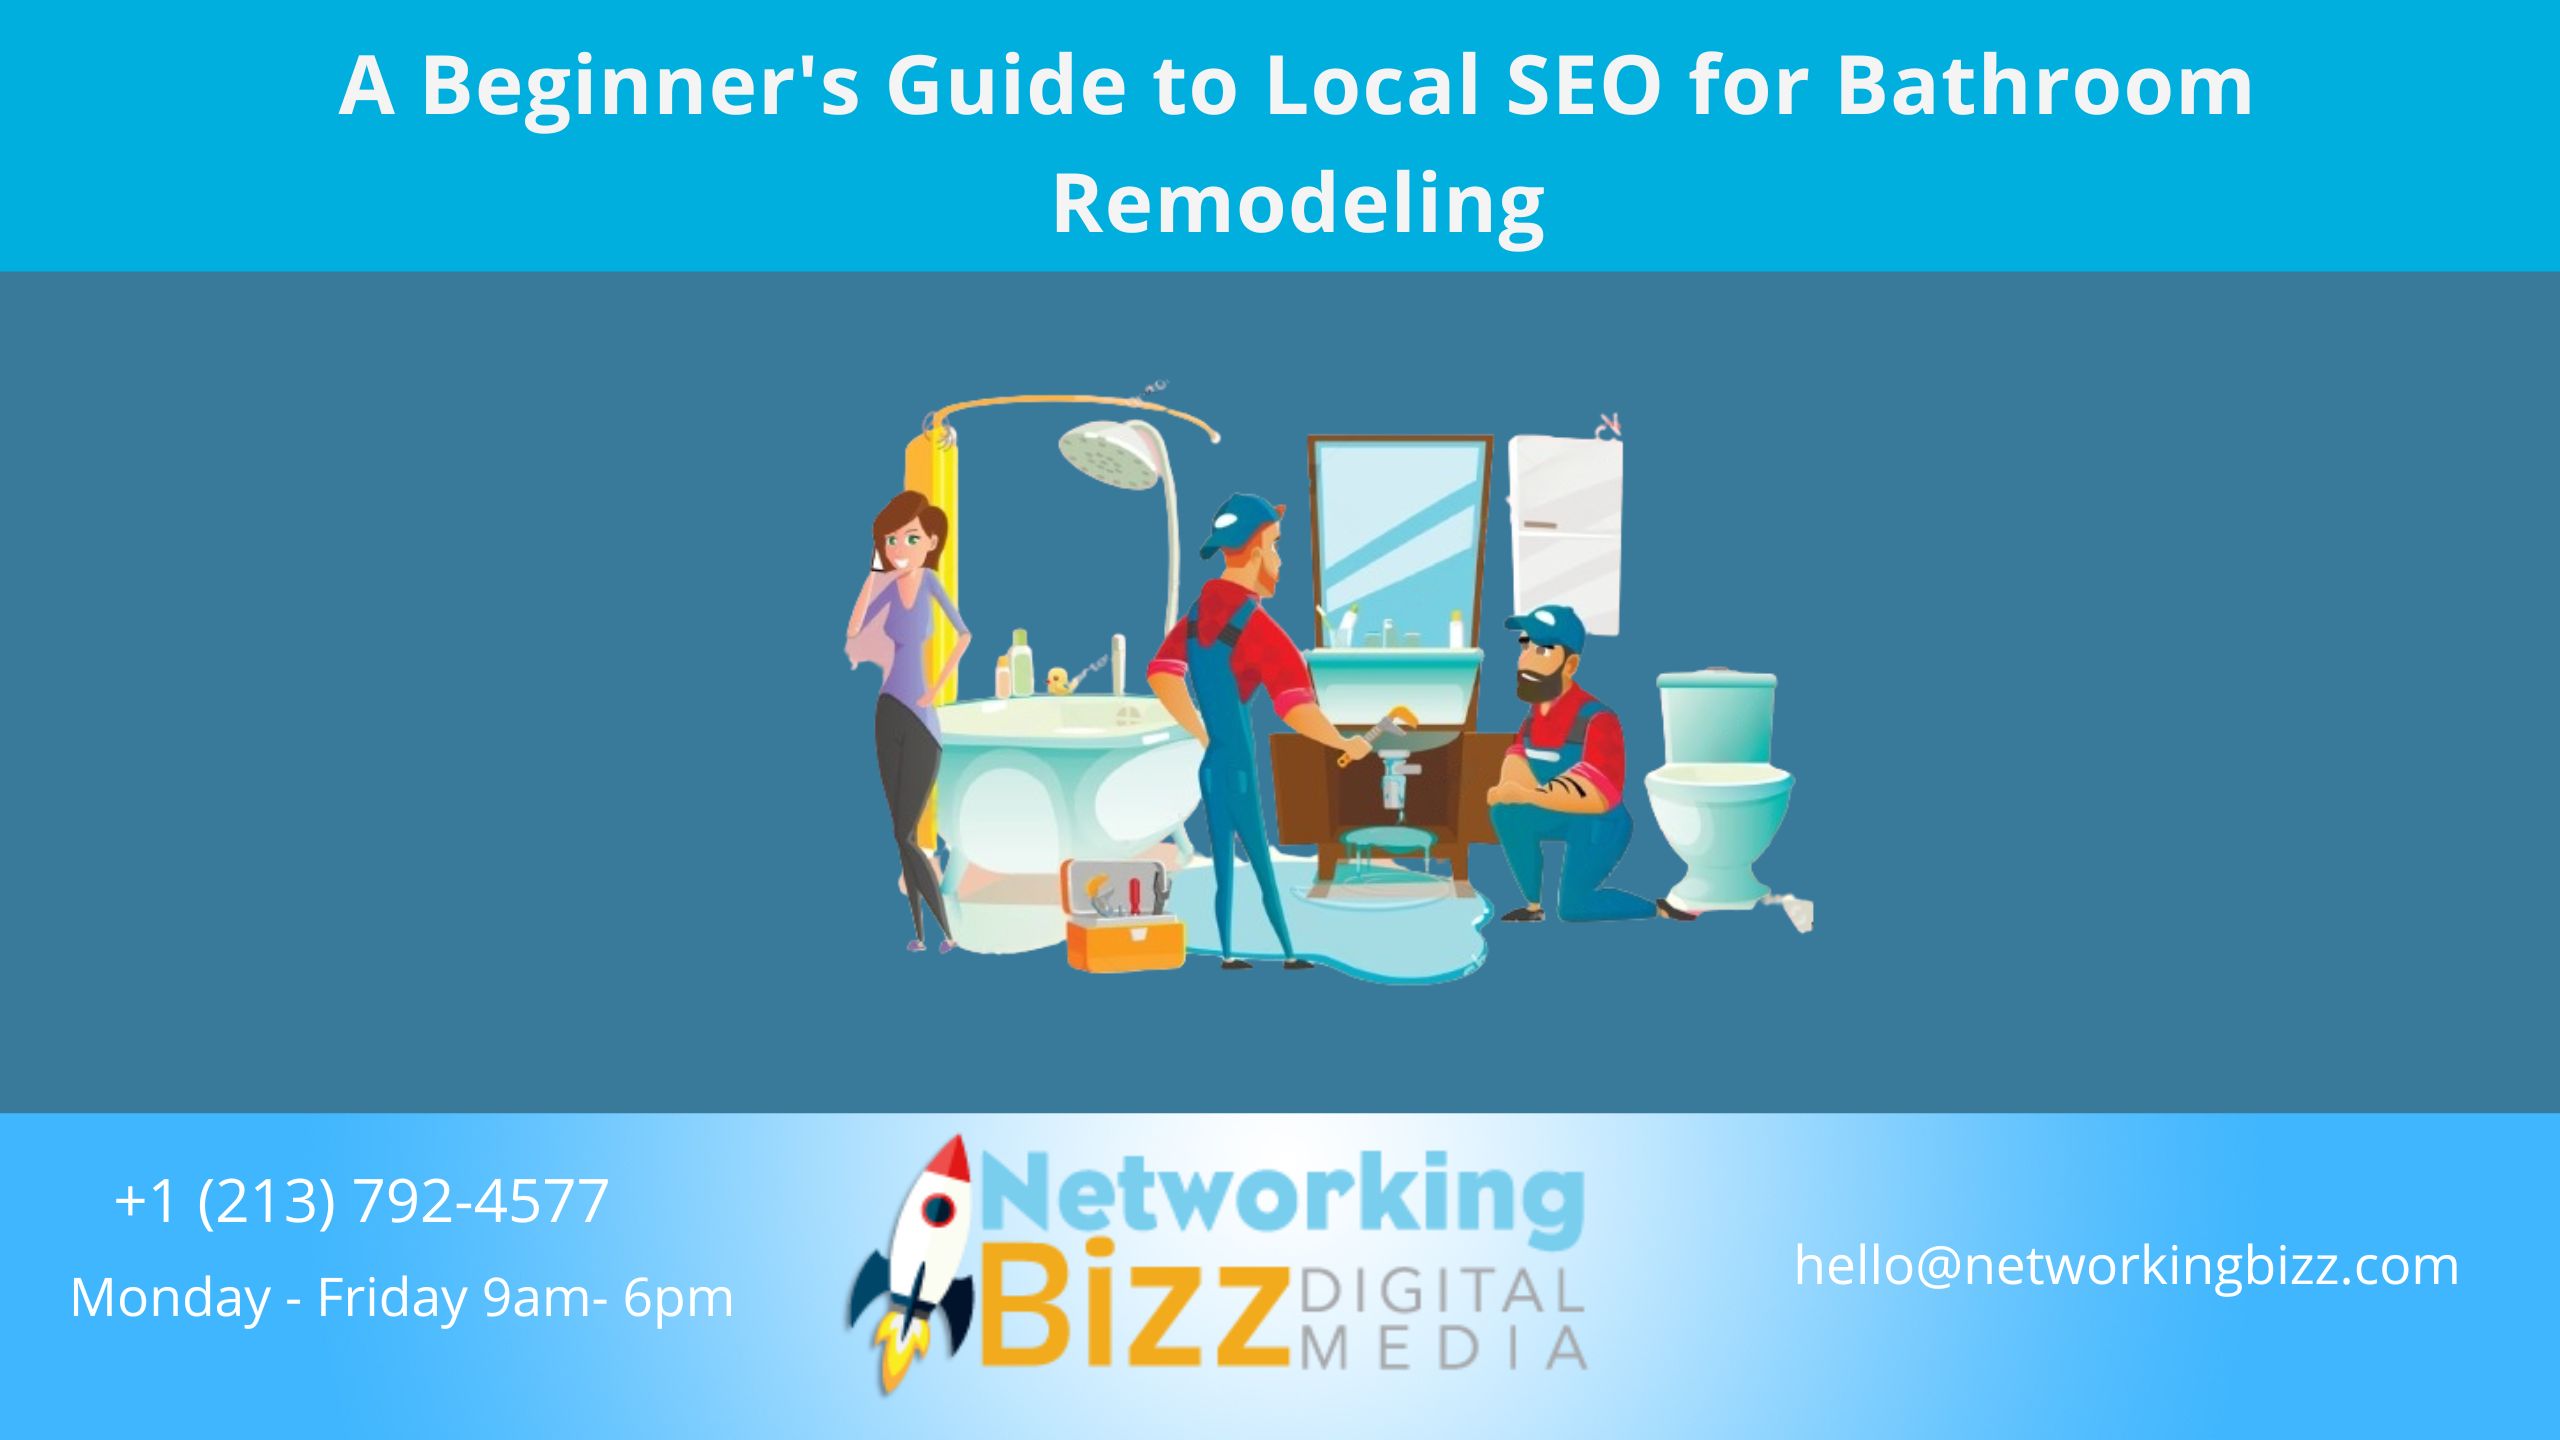 A Beginner’s Guide To Local SEO For Bathroom Remodeling